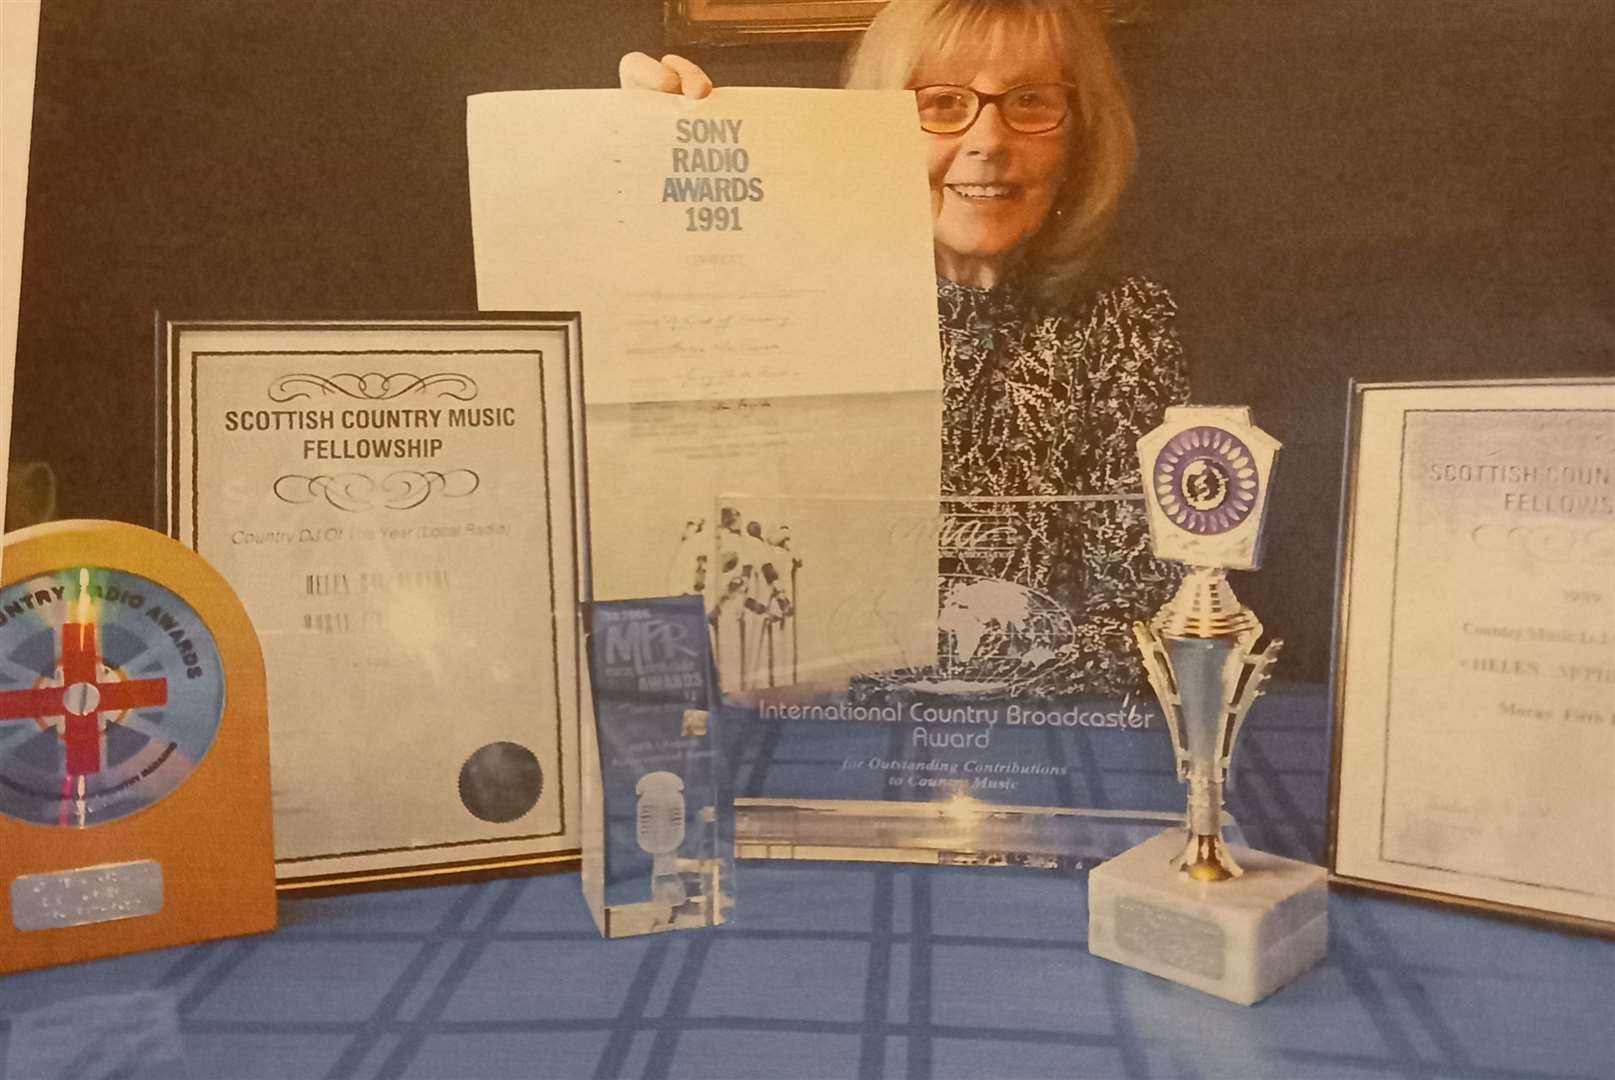 Awards that Helen MacPherson received over the years for her rcountry music shows for Moray Firth Radio.